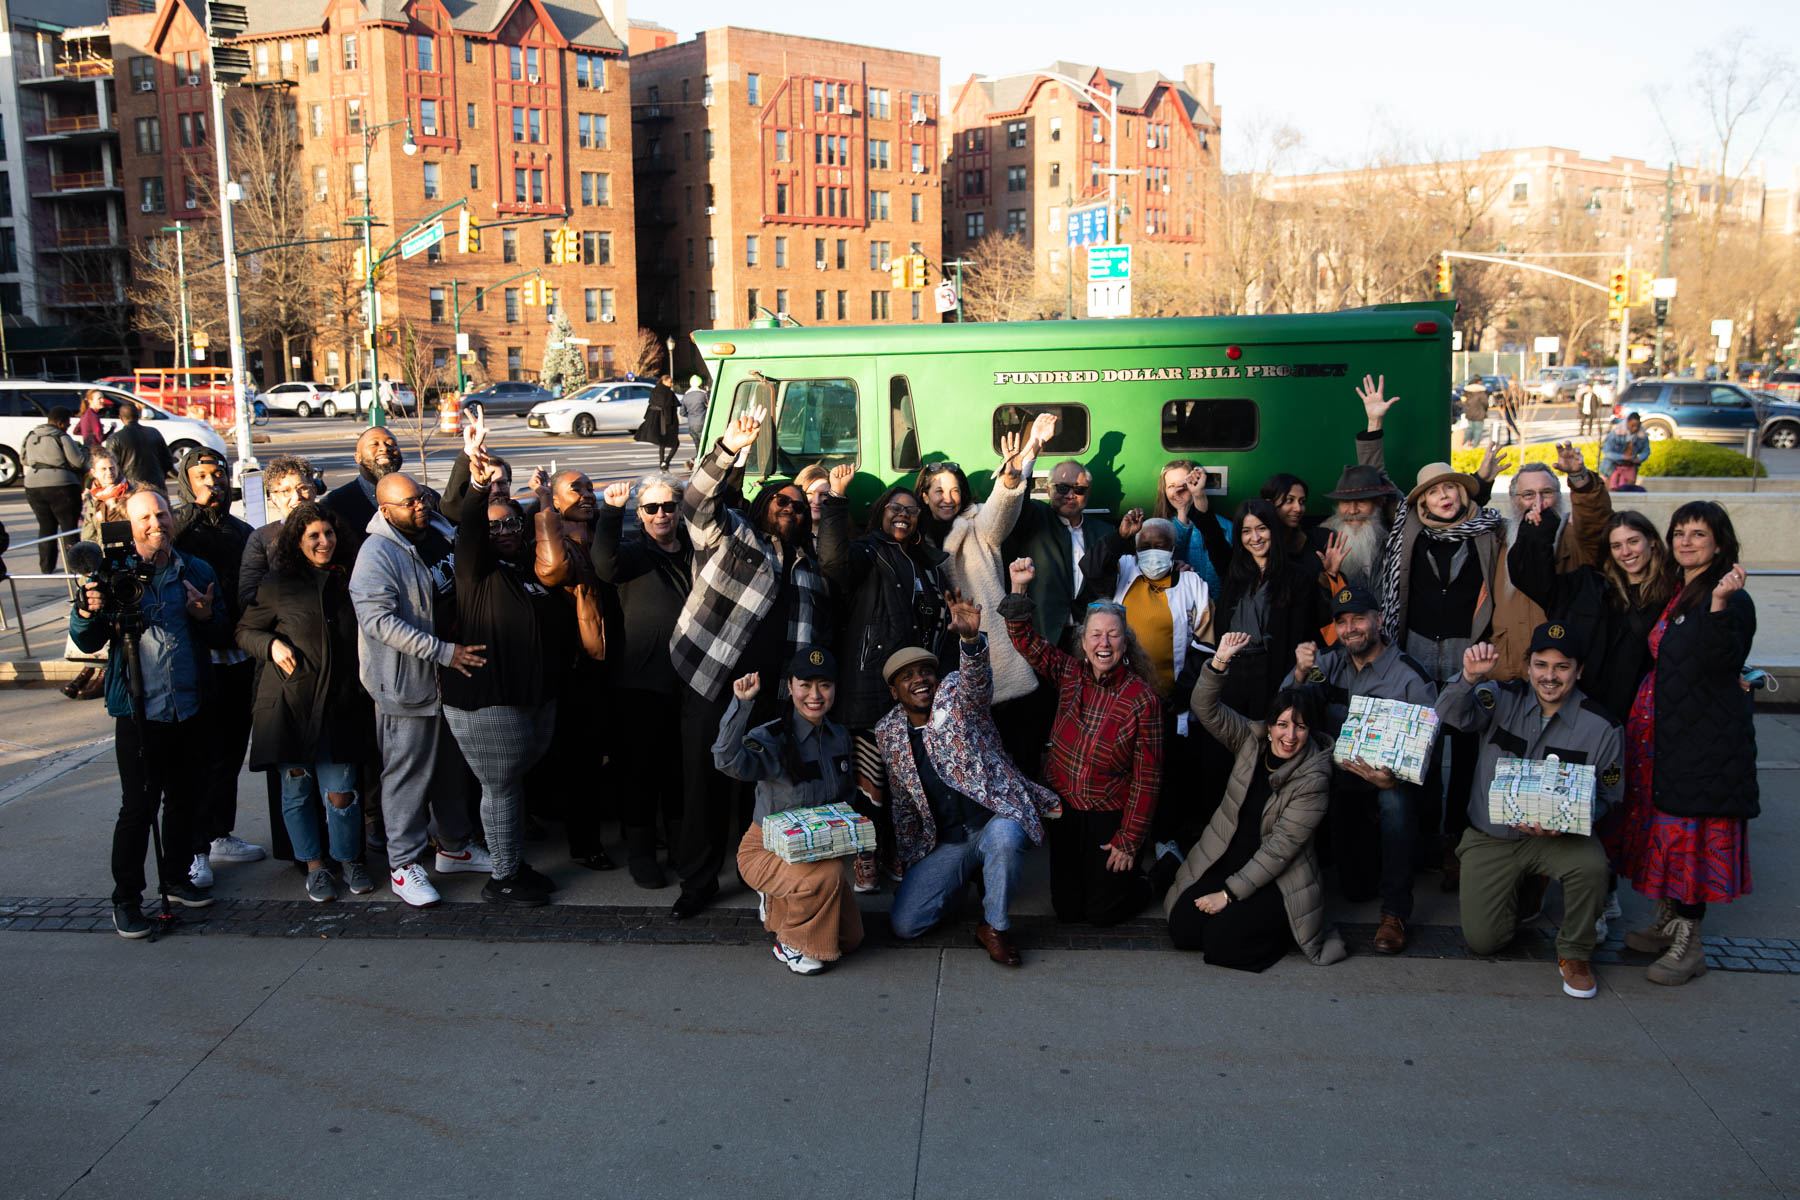 About 30 people outdoors standing and crouching in front of a green armored truck. The street, passing cars, pedestrians and residential buildings are pictured in the background.